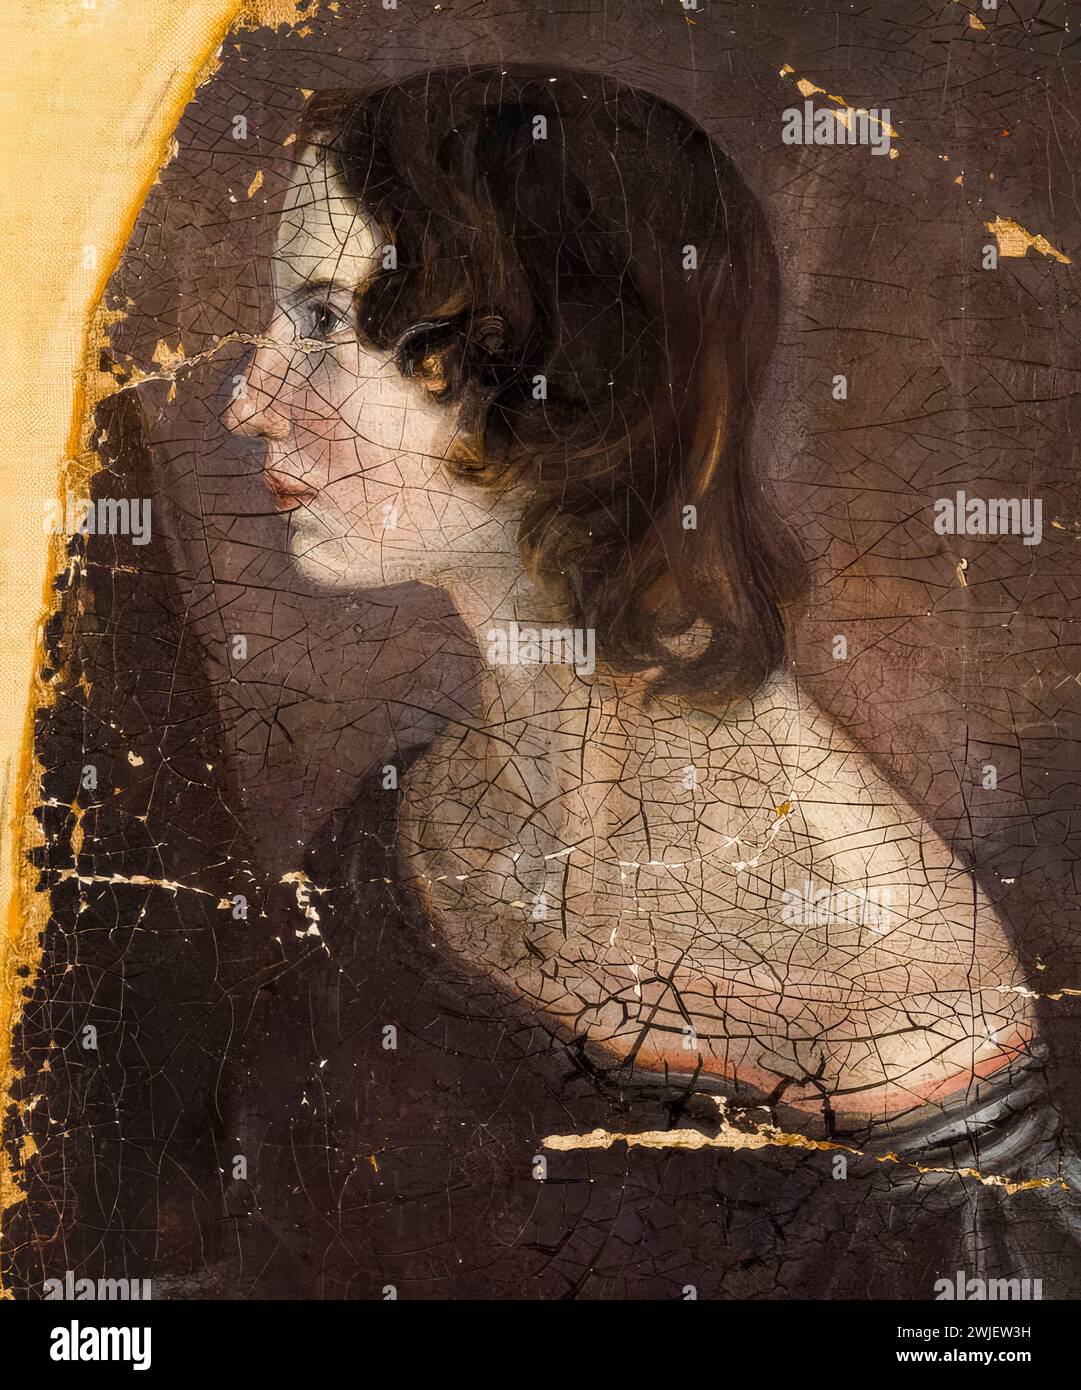 Emily Brontë (1818-1848), English novelist and poet, portrait painting in oil on canvas by Patrick Branwell Brontë, circa 1833 Stock Photo